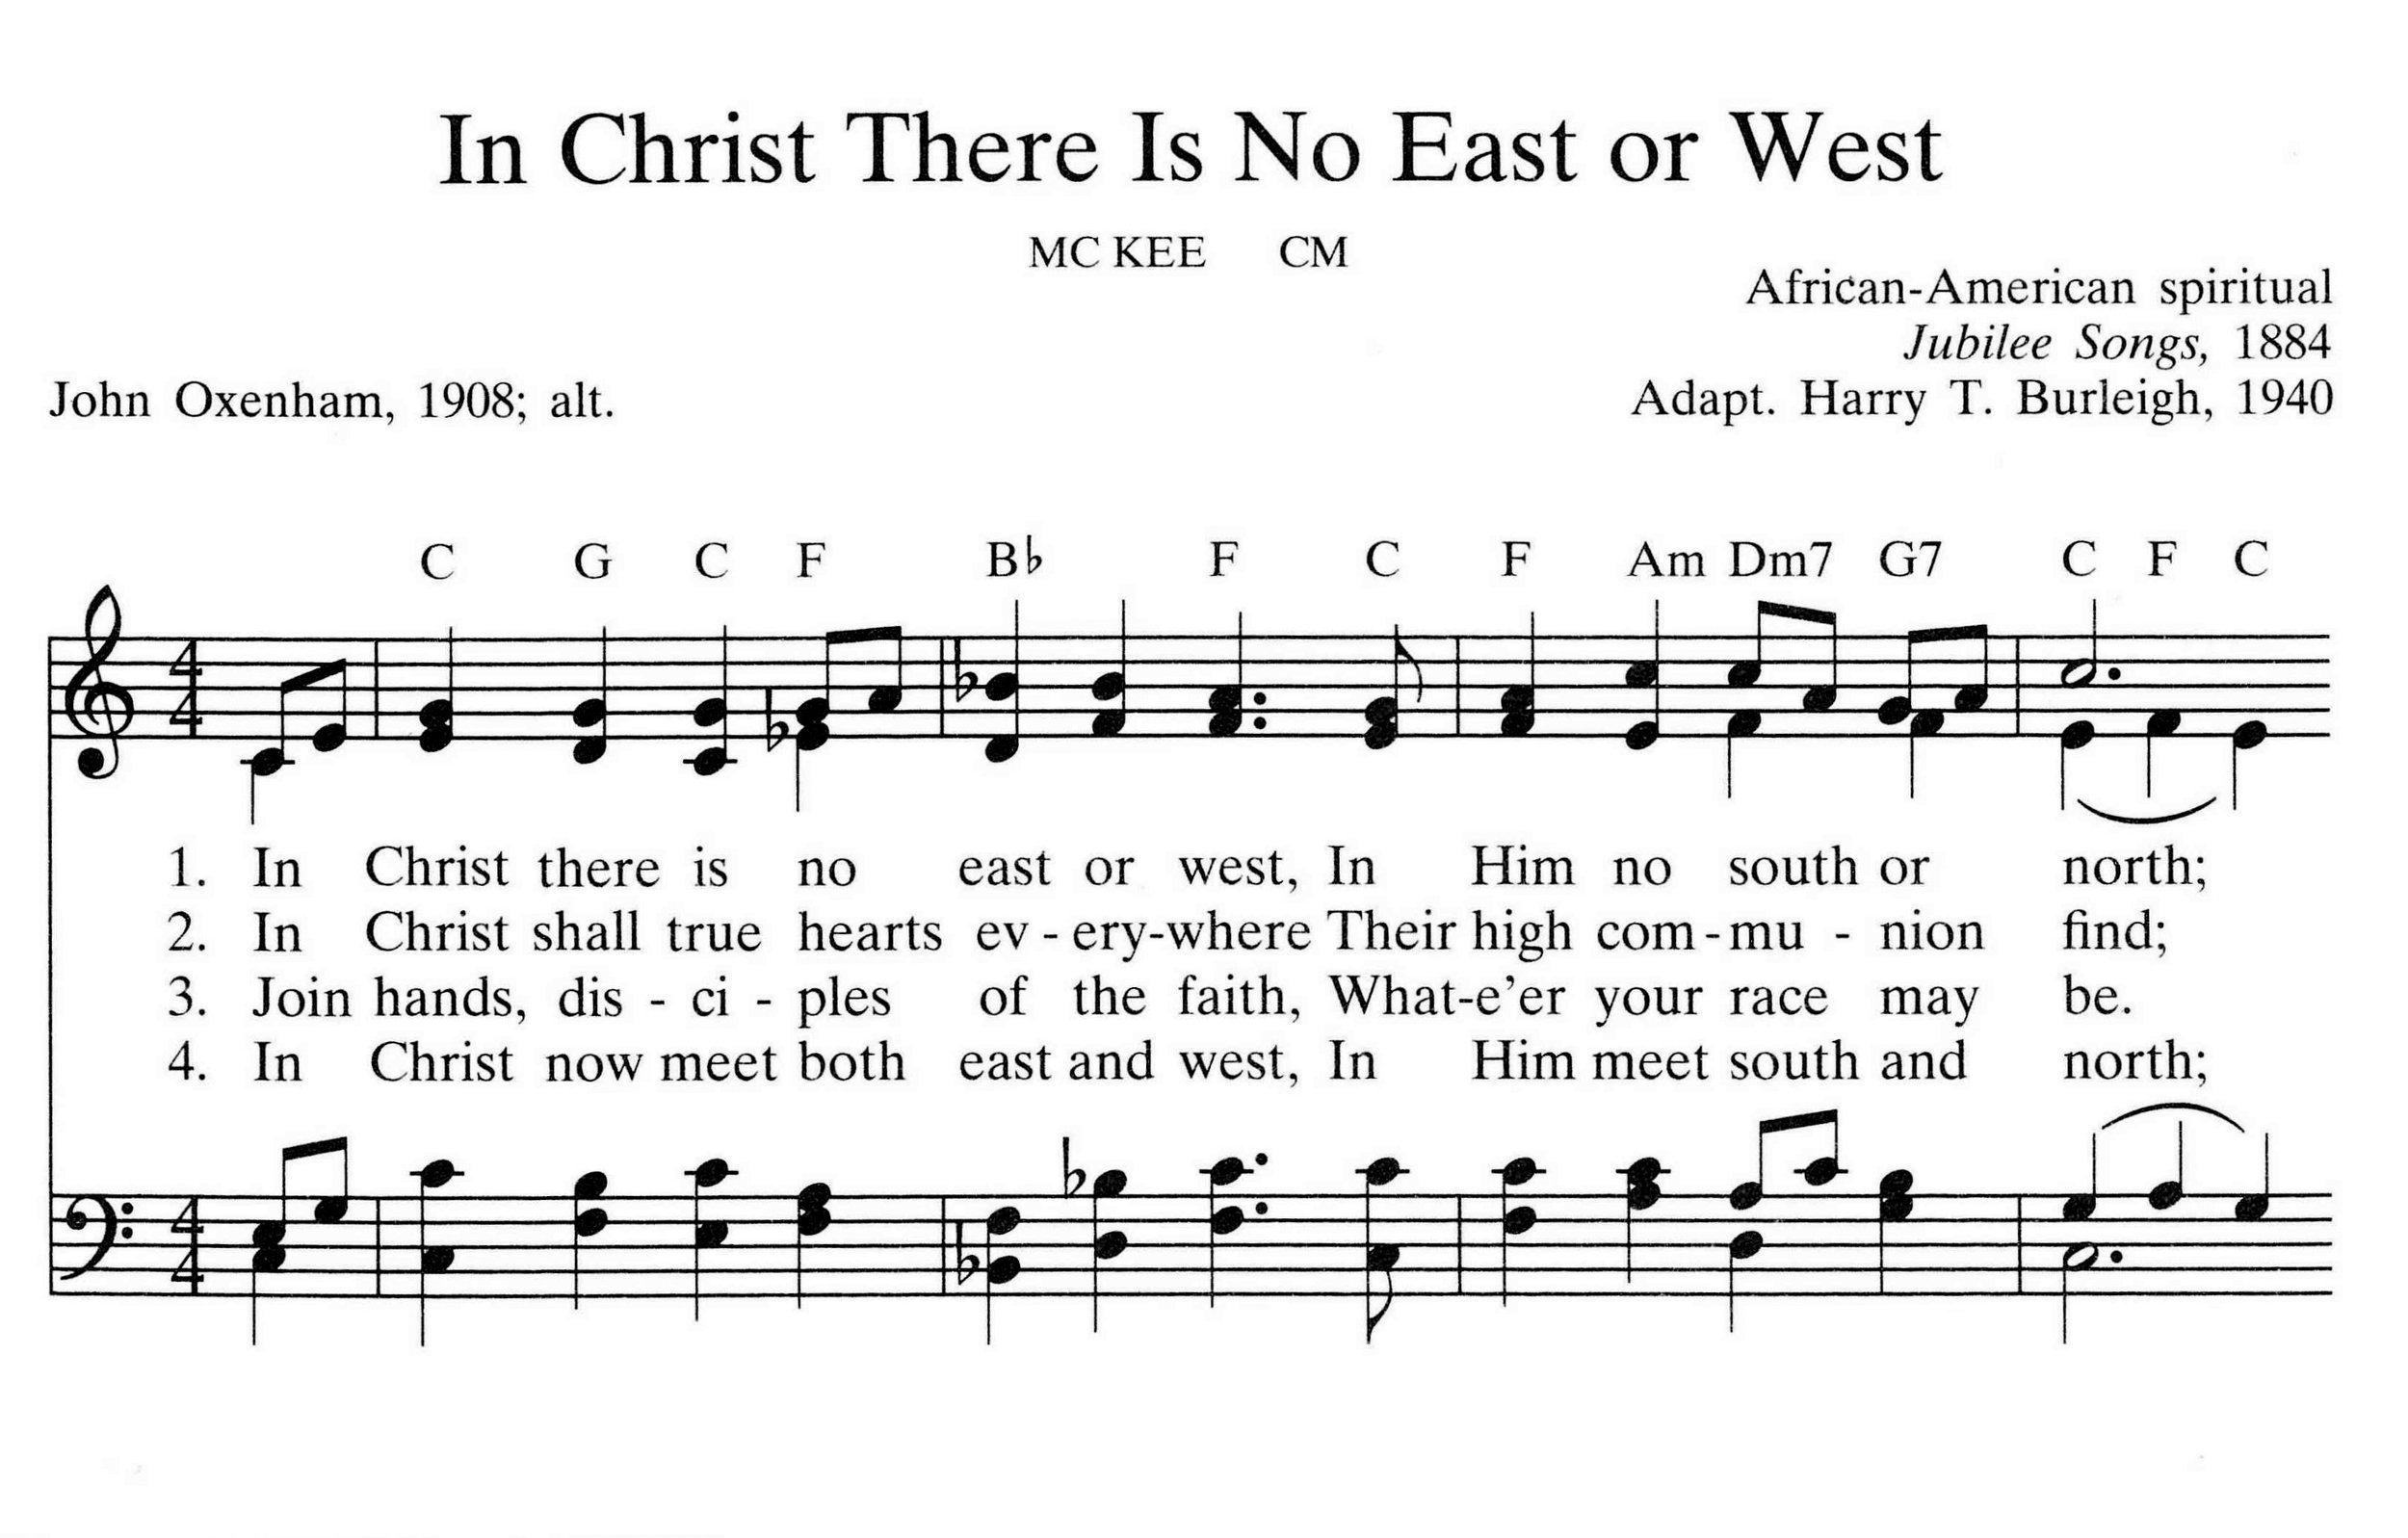 In Christ there is No East or West 1.jpg